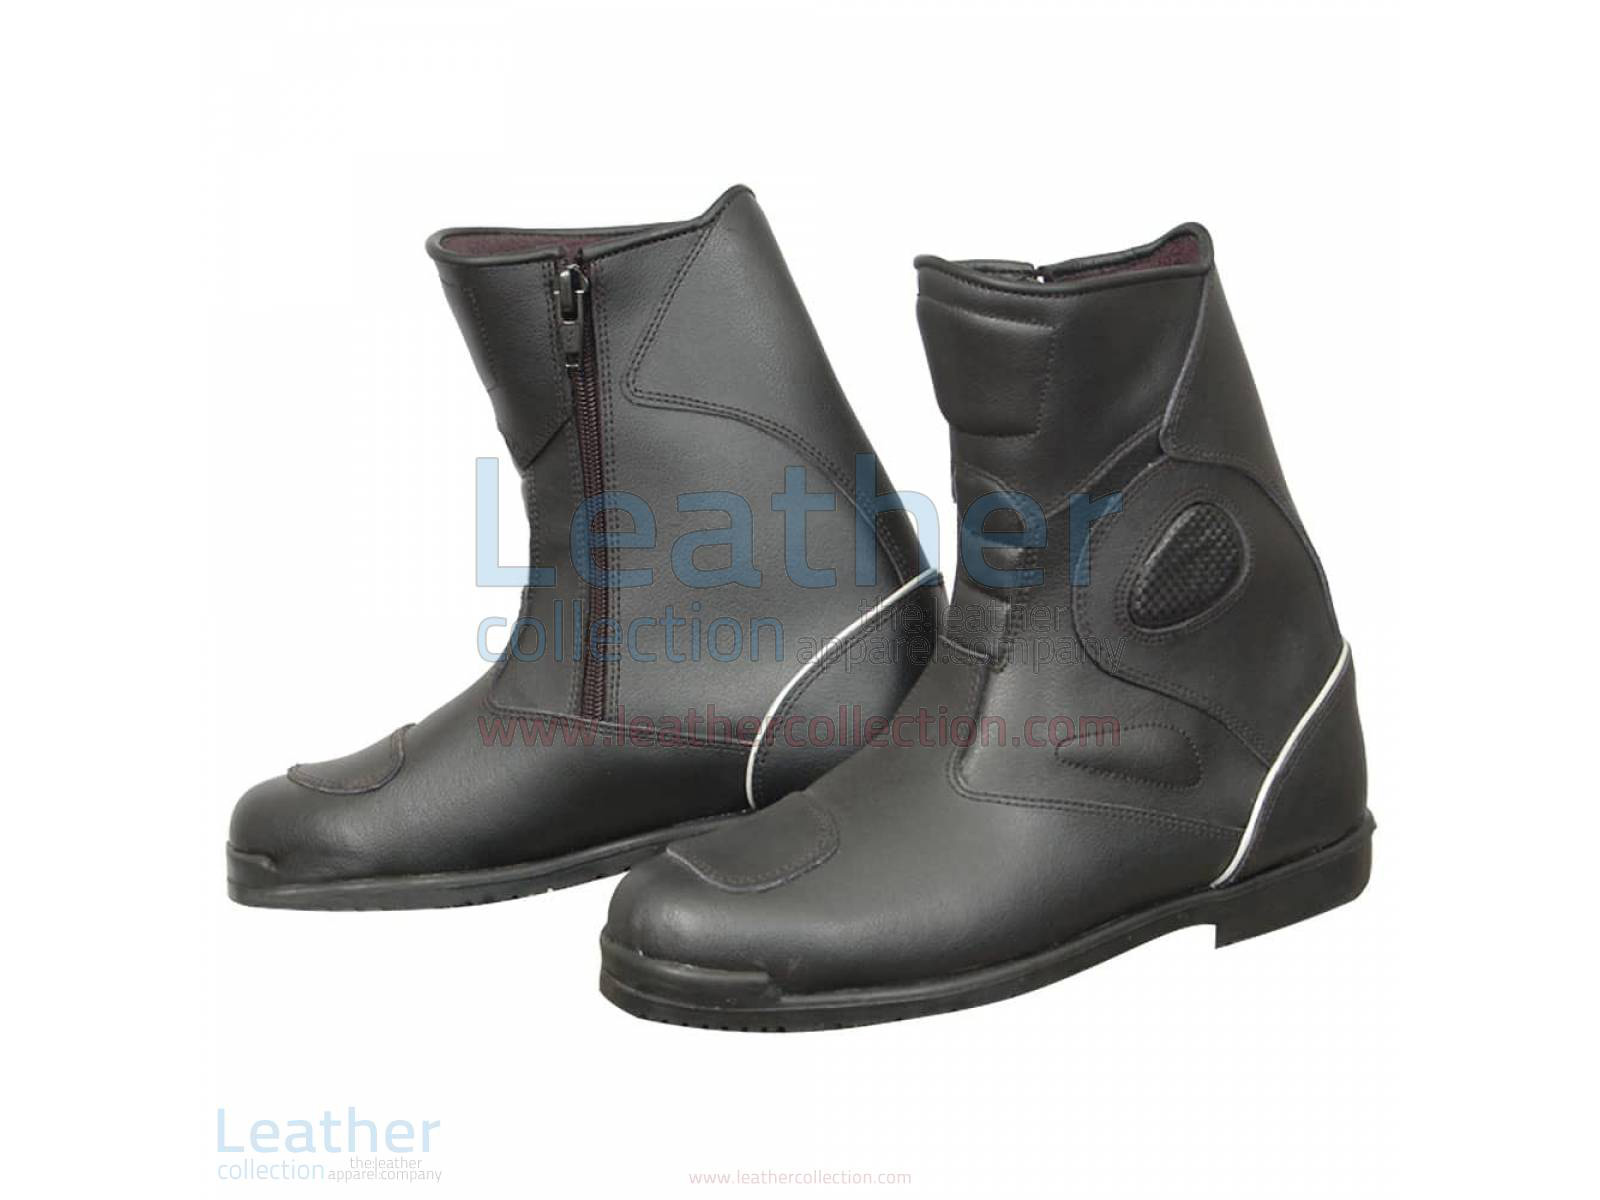 URBAN MOTORCYCLE BOOTS